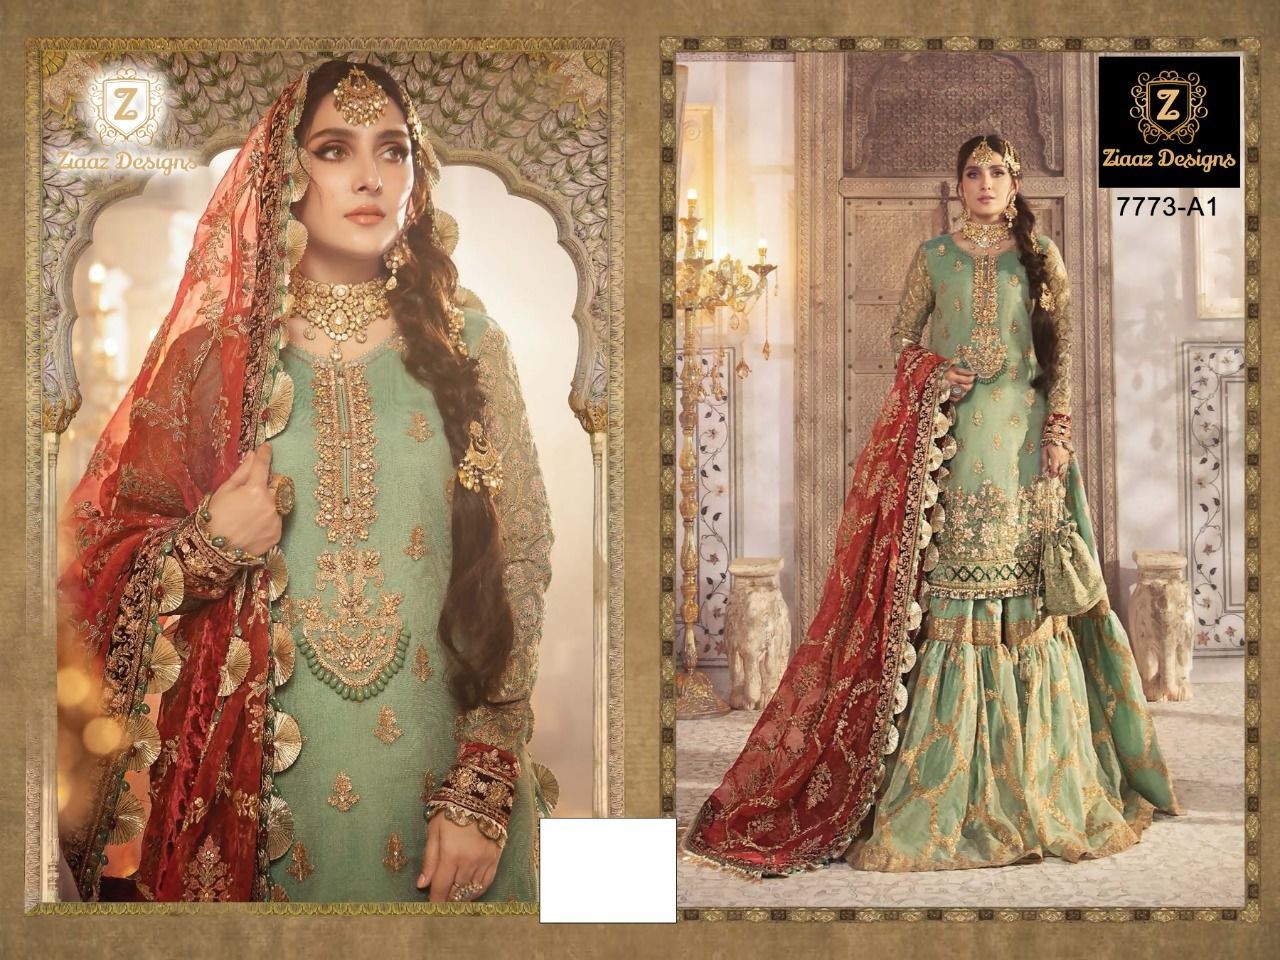 ZIAAZ DESIGNS MARIA B MBROIDERED COLLECTION 7773 A1 GREEN PAKISTANI SUITS WHOLESALE 